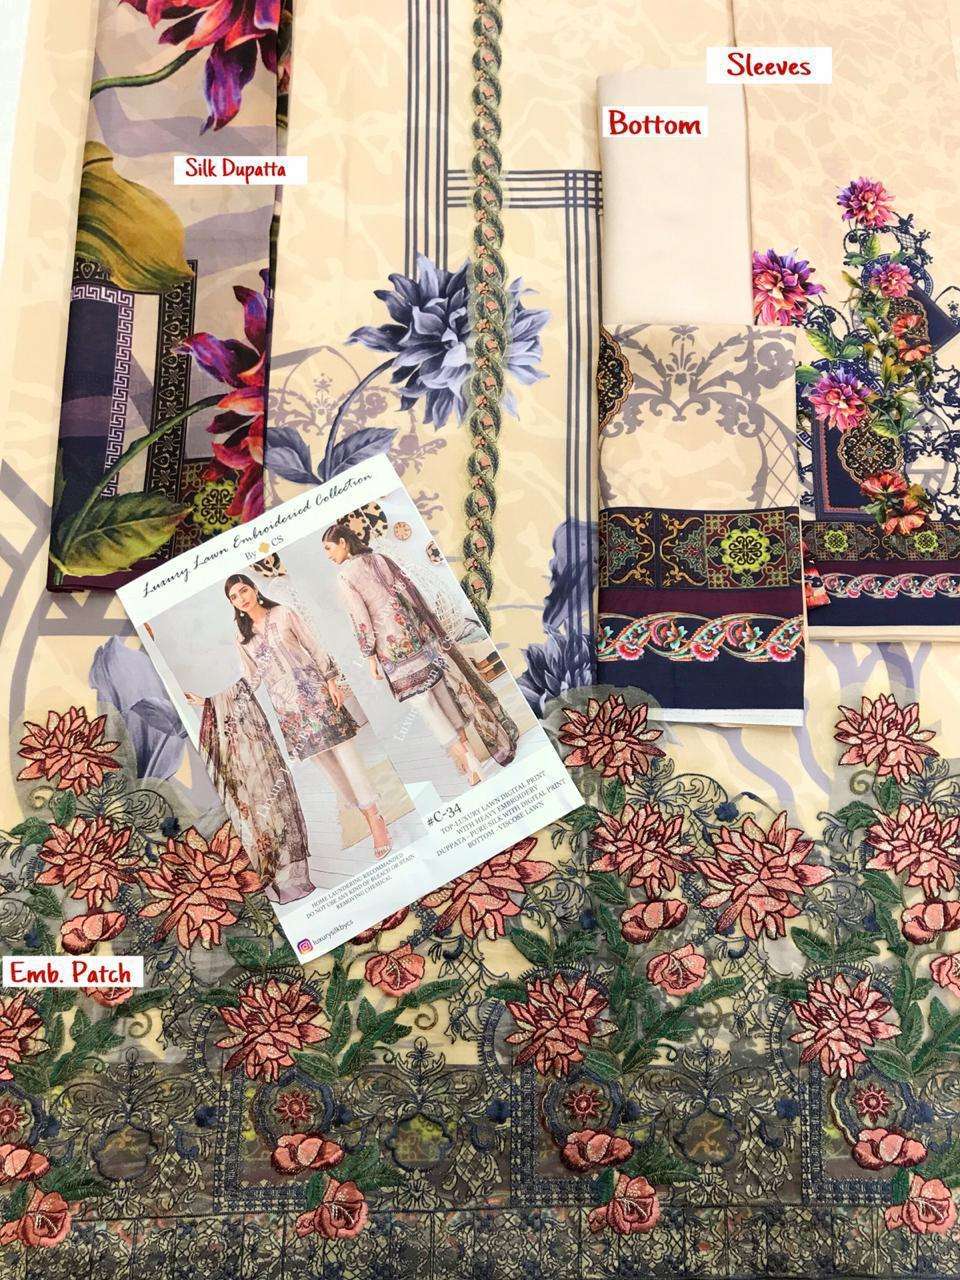 LUXURY LAWN EMBROIDERIED COLLECTION VOL-10 BY CS 34 TO 36 SERIES DESIGNER PAKISTANI SUITS BEAUTIFUL STYLISH FANCY COLORFUL PARTY WEAR & OCCASIONAL WEAR LUXURY LAWN DIGITAL PRINT WITH EMBROIDERY DRESSES AT WHOLESALE PRICE